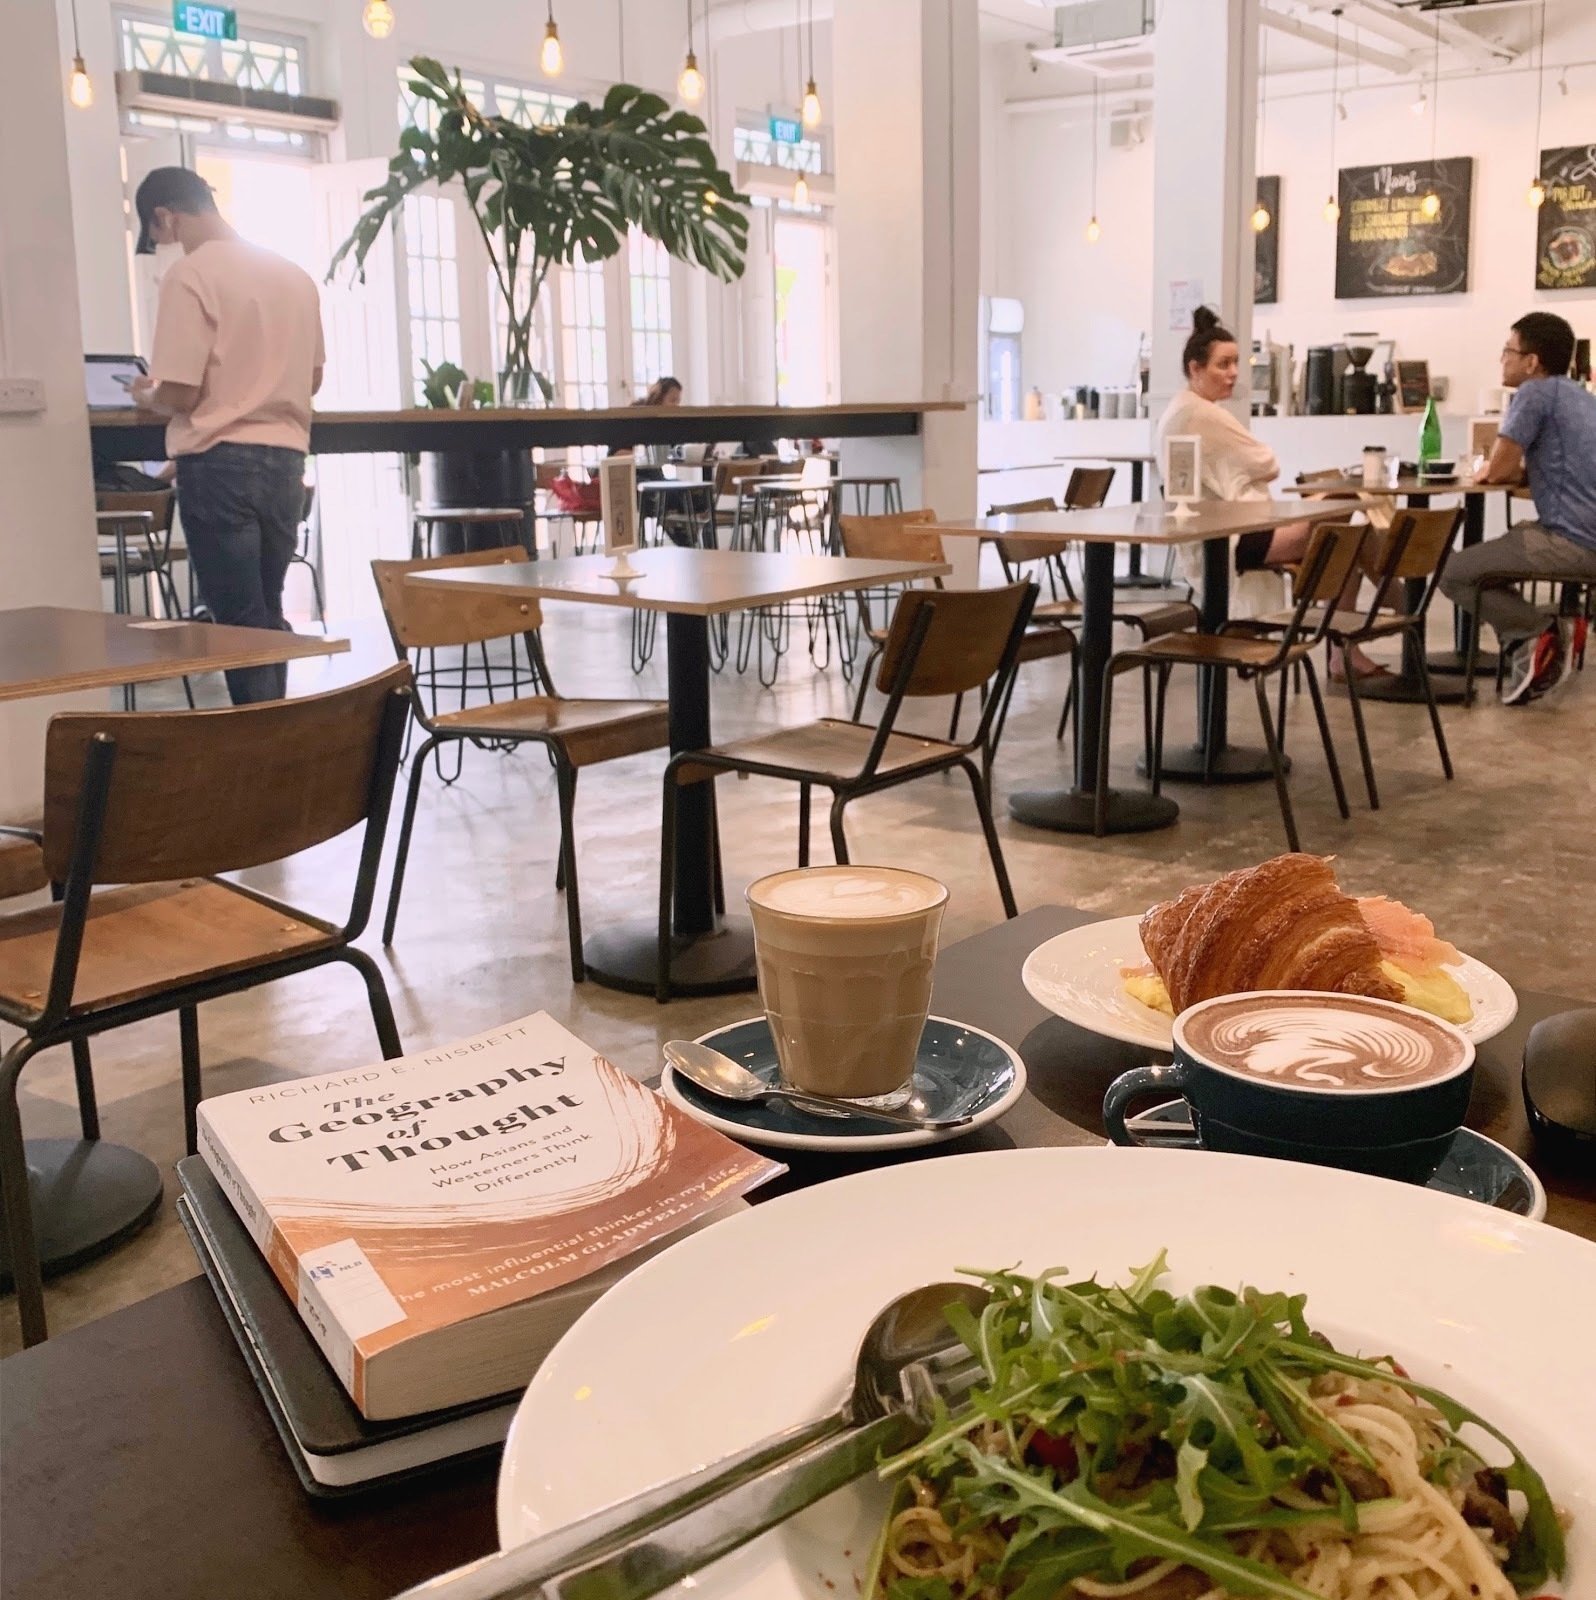 <span class="translation_missing" title="translation missing: en.meta.location_title, location_name: Twenty Eight Cafe, city: Singapore">Location Title</span>